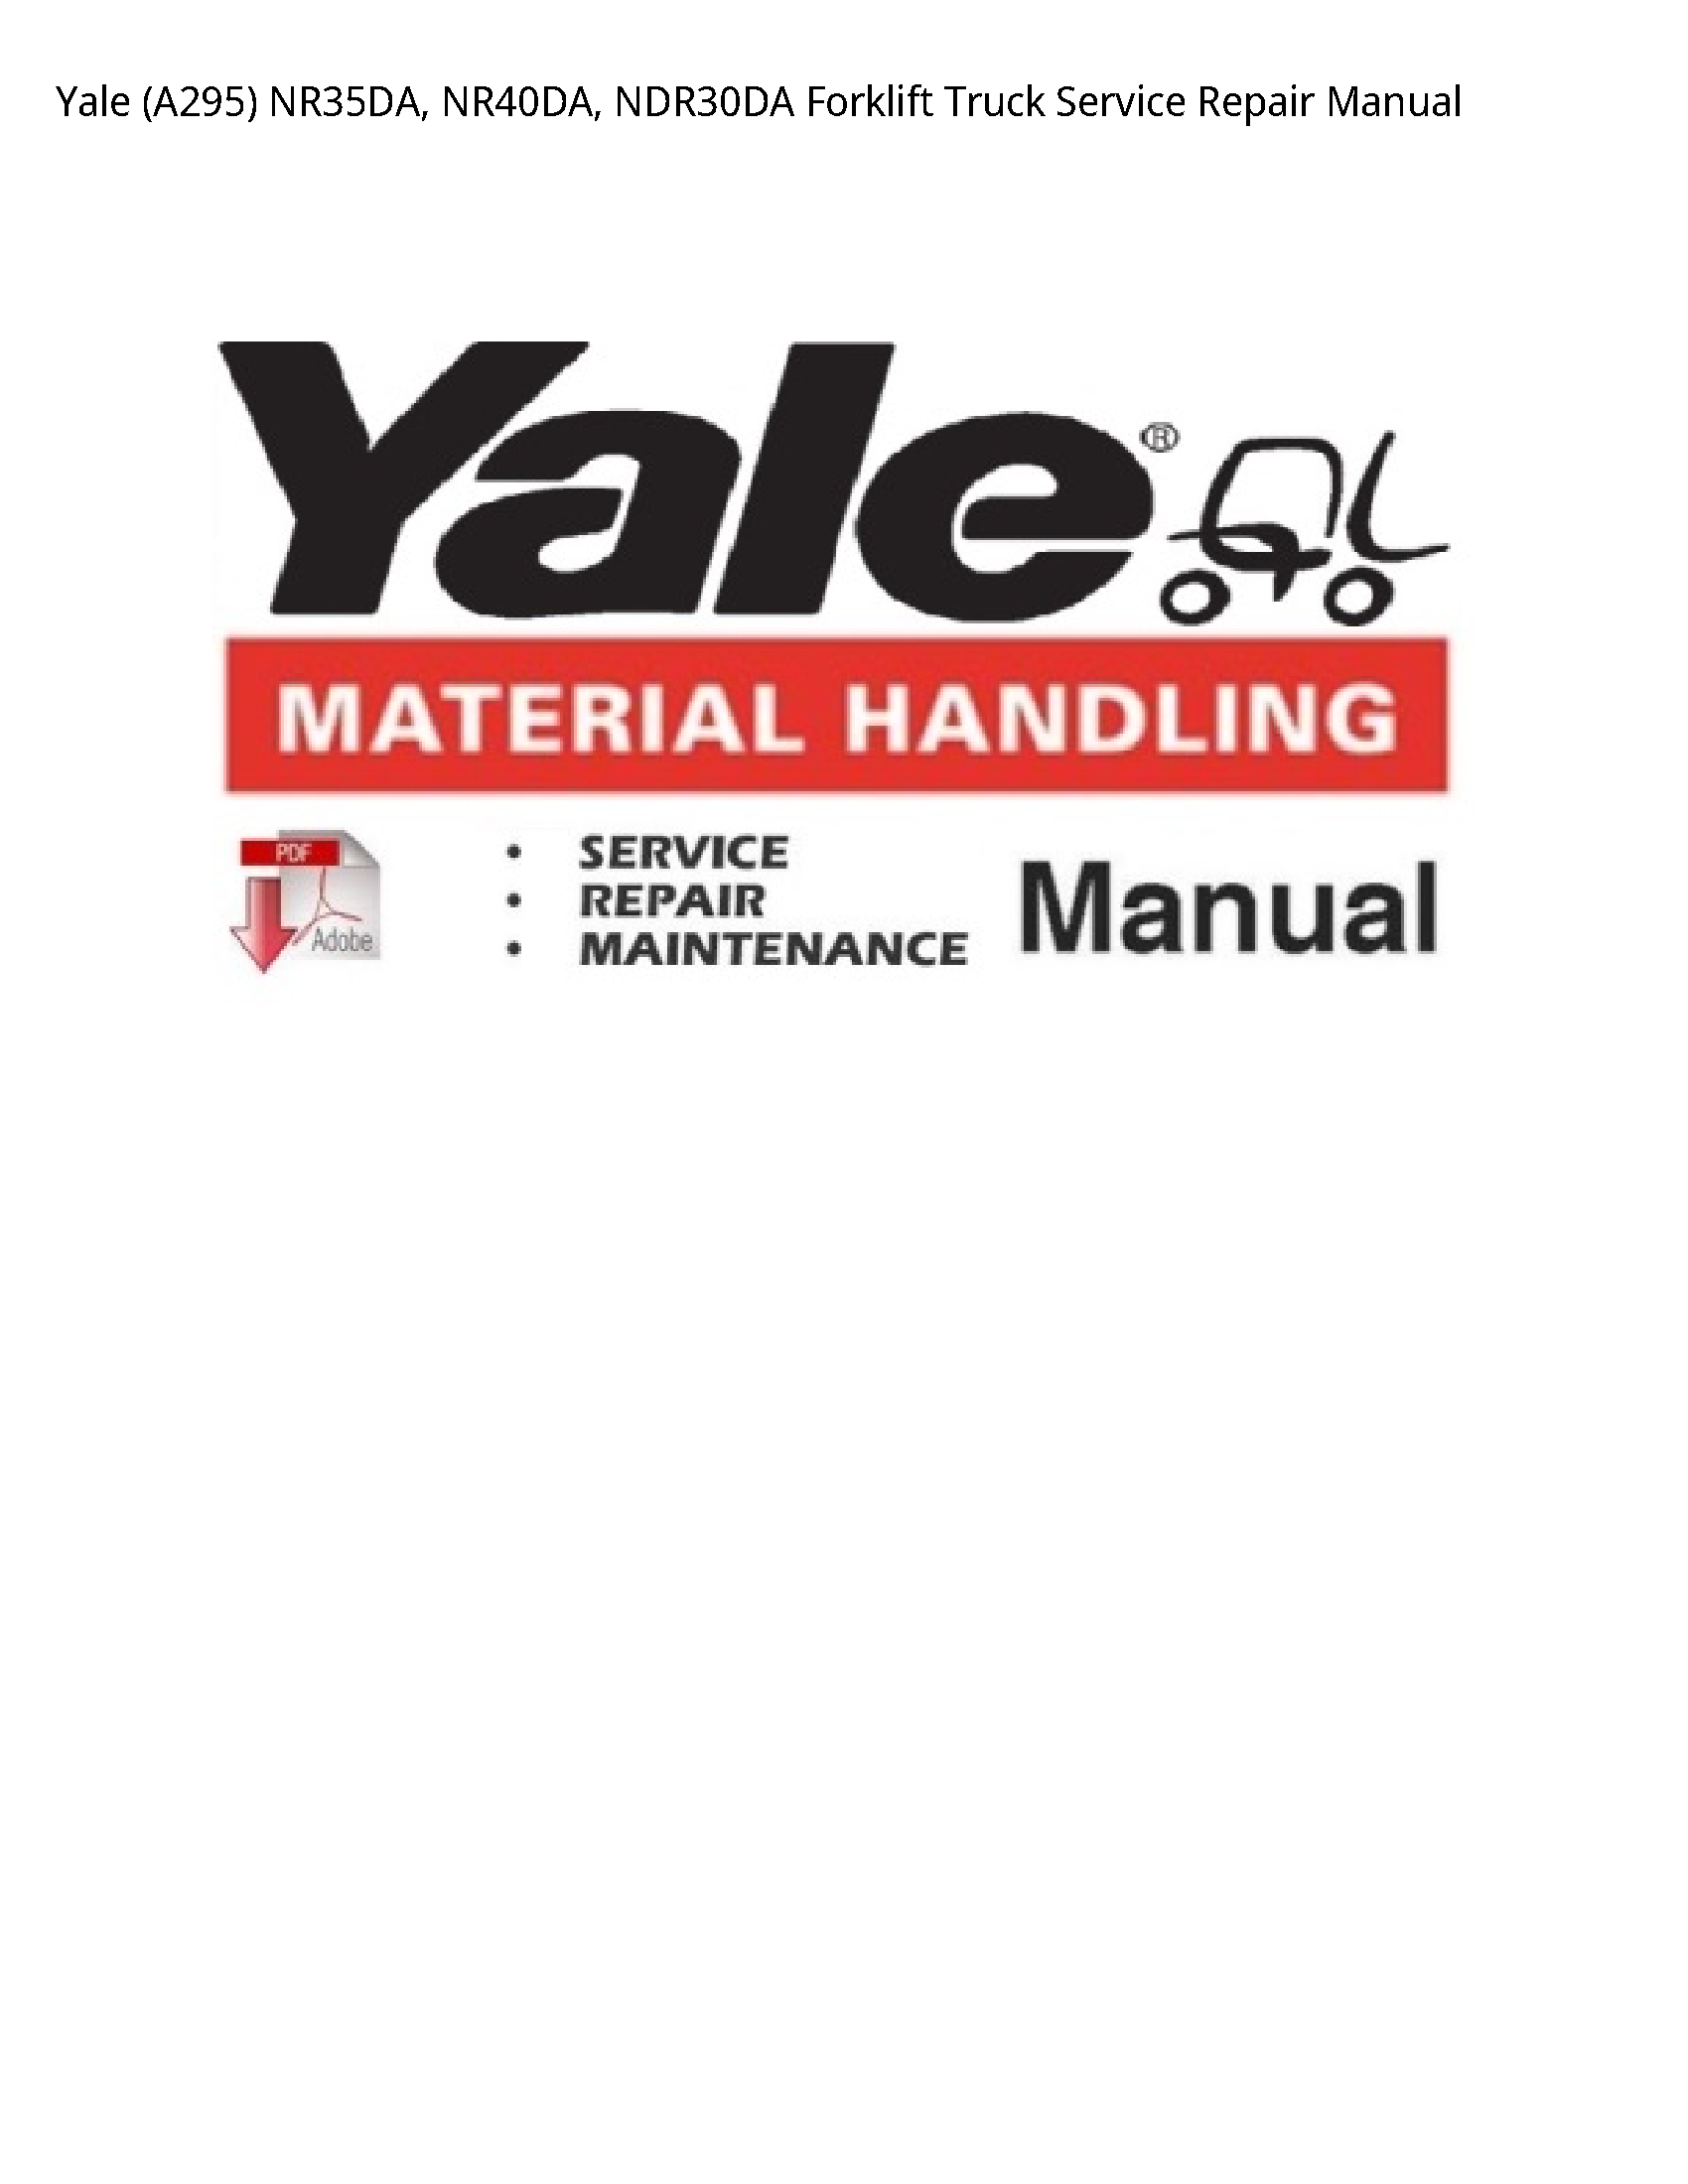 Yale (A295) Forklift Truck manual